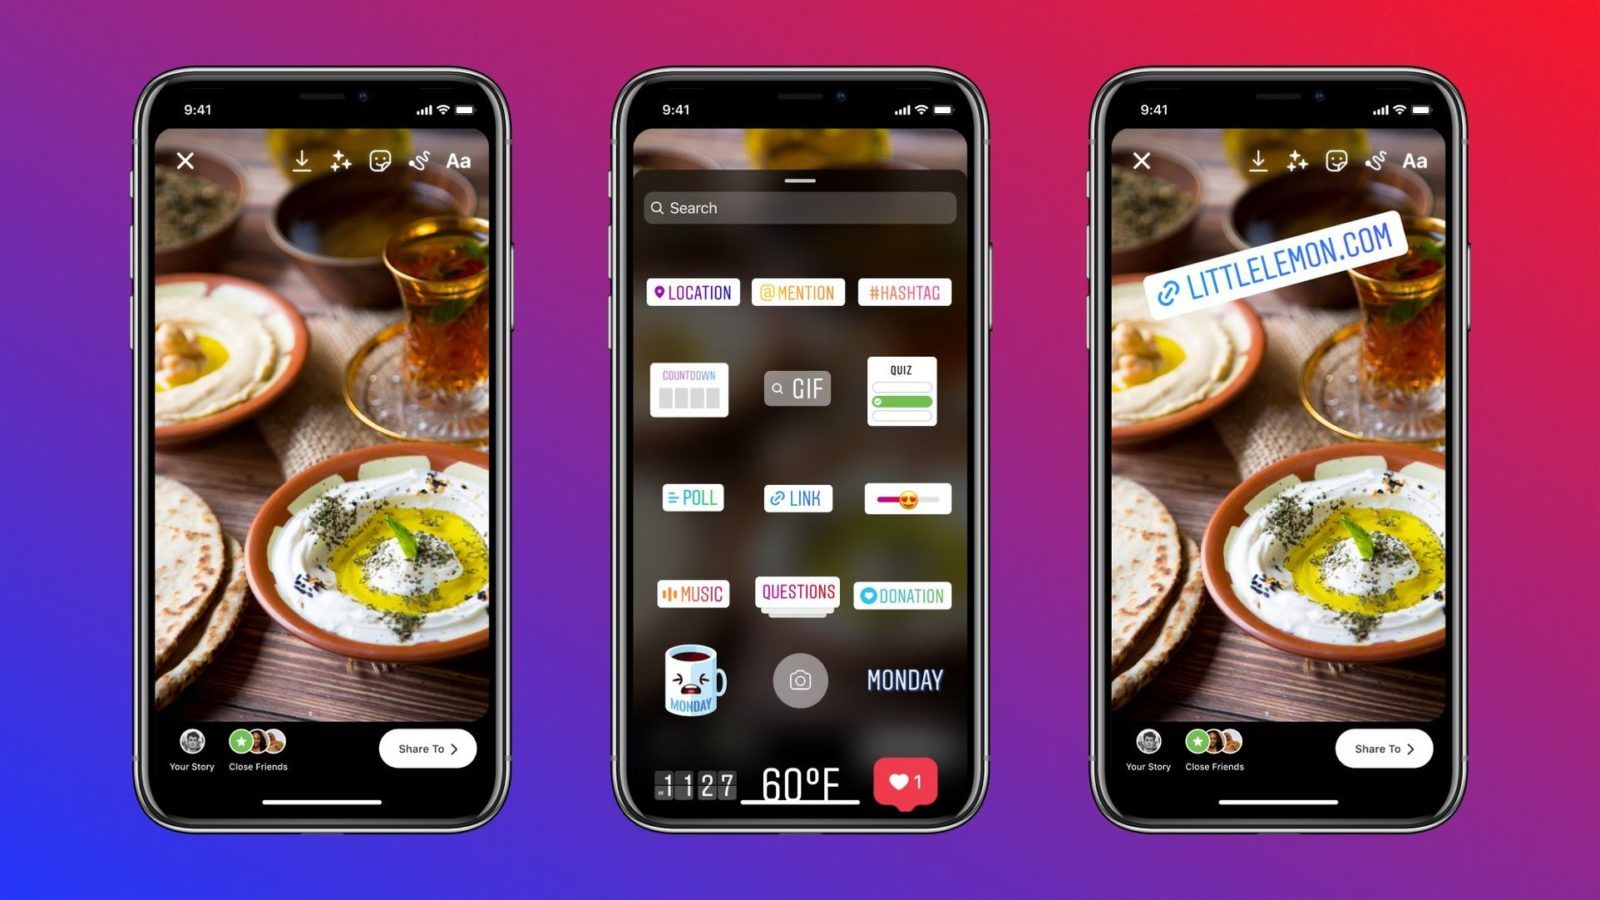 What we like about the 3 new Instagram story features